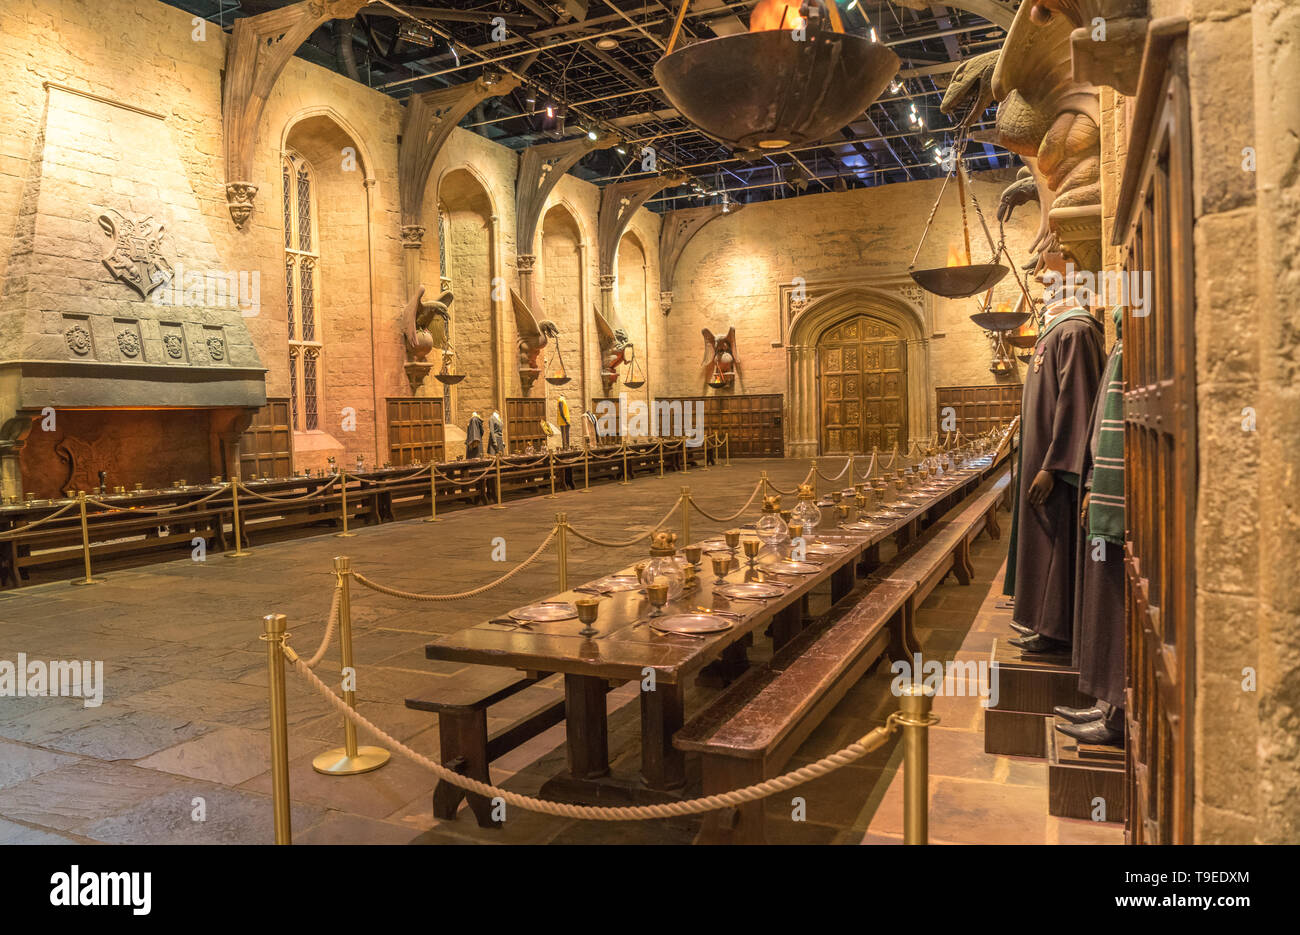 The Grand Hall with props and costumes used in the production of the films  Warner Bros. Studio Tour 'The Making of Harry Potter', Leavesden, London  Stock Photo - Alamy